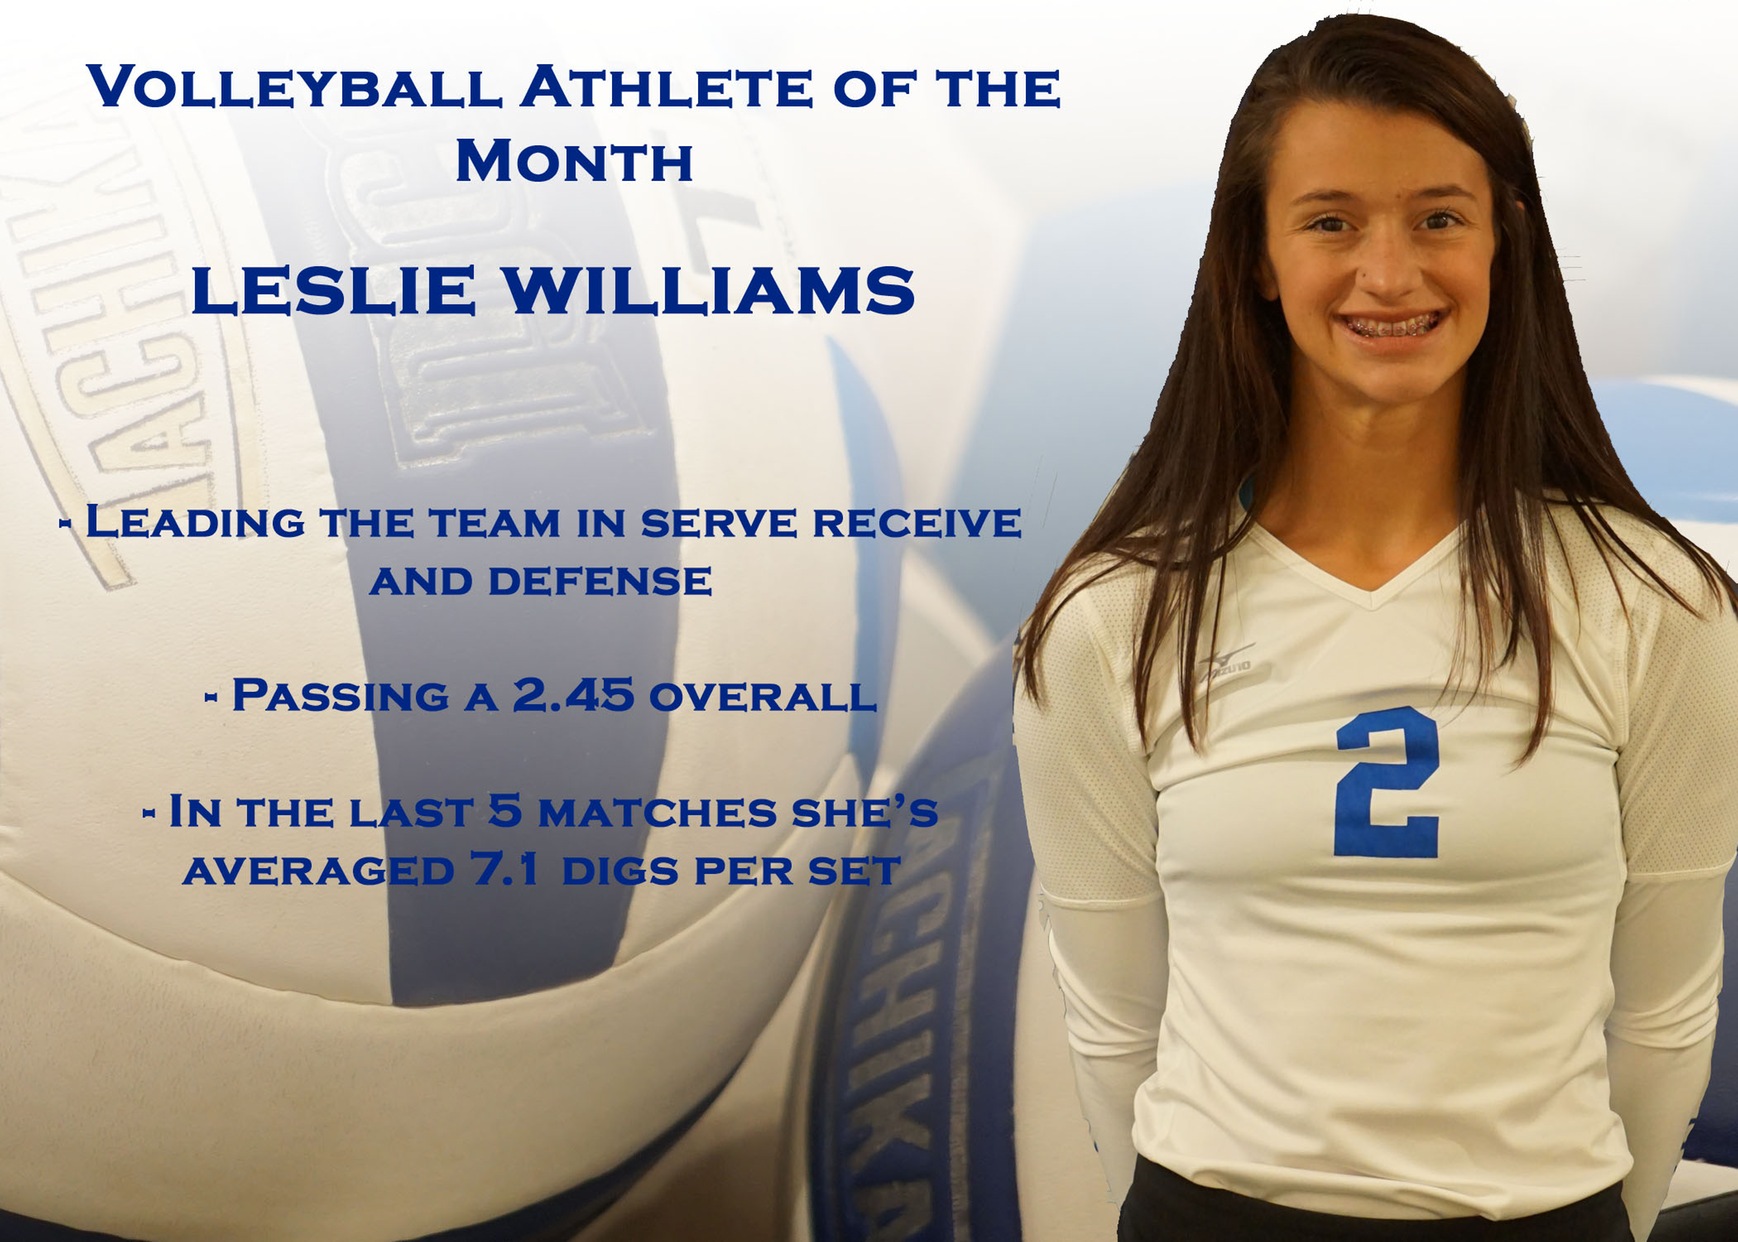 Women's Volleyball Athlete of the Month